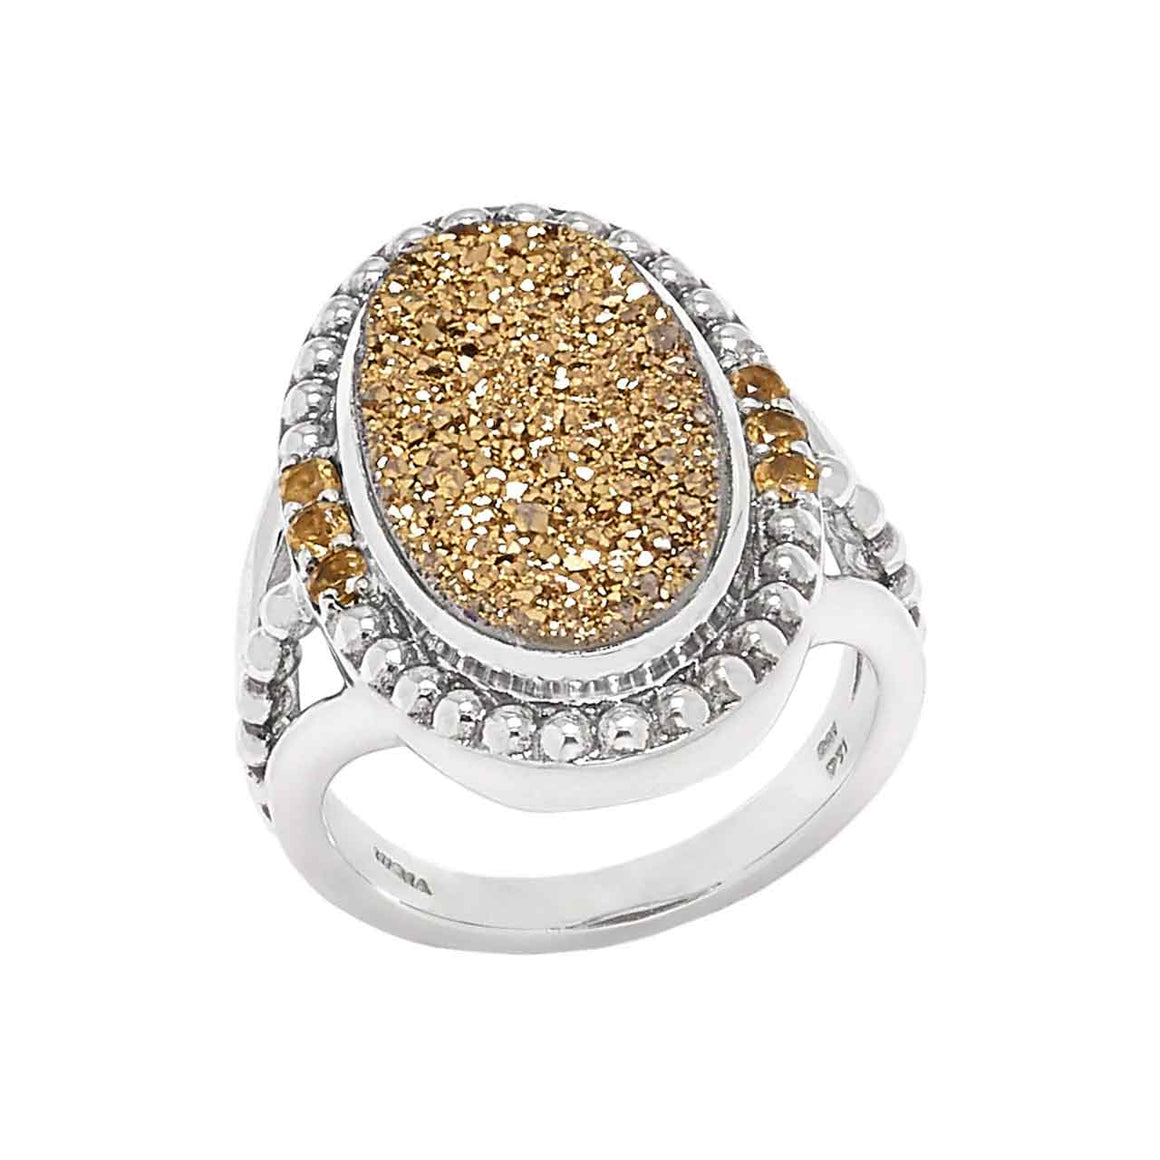 Gold Drusy and Citrine 7 Stone Ring